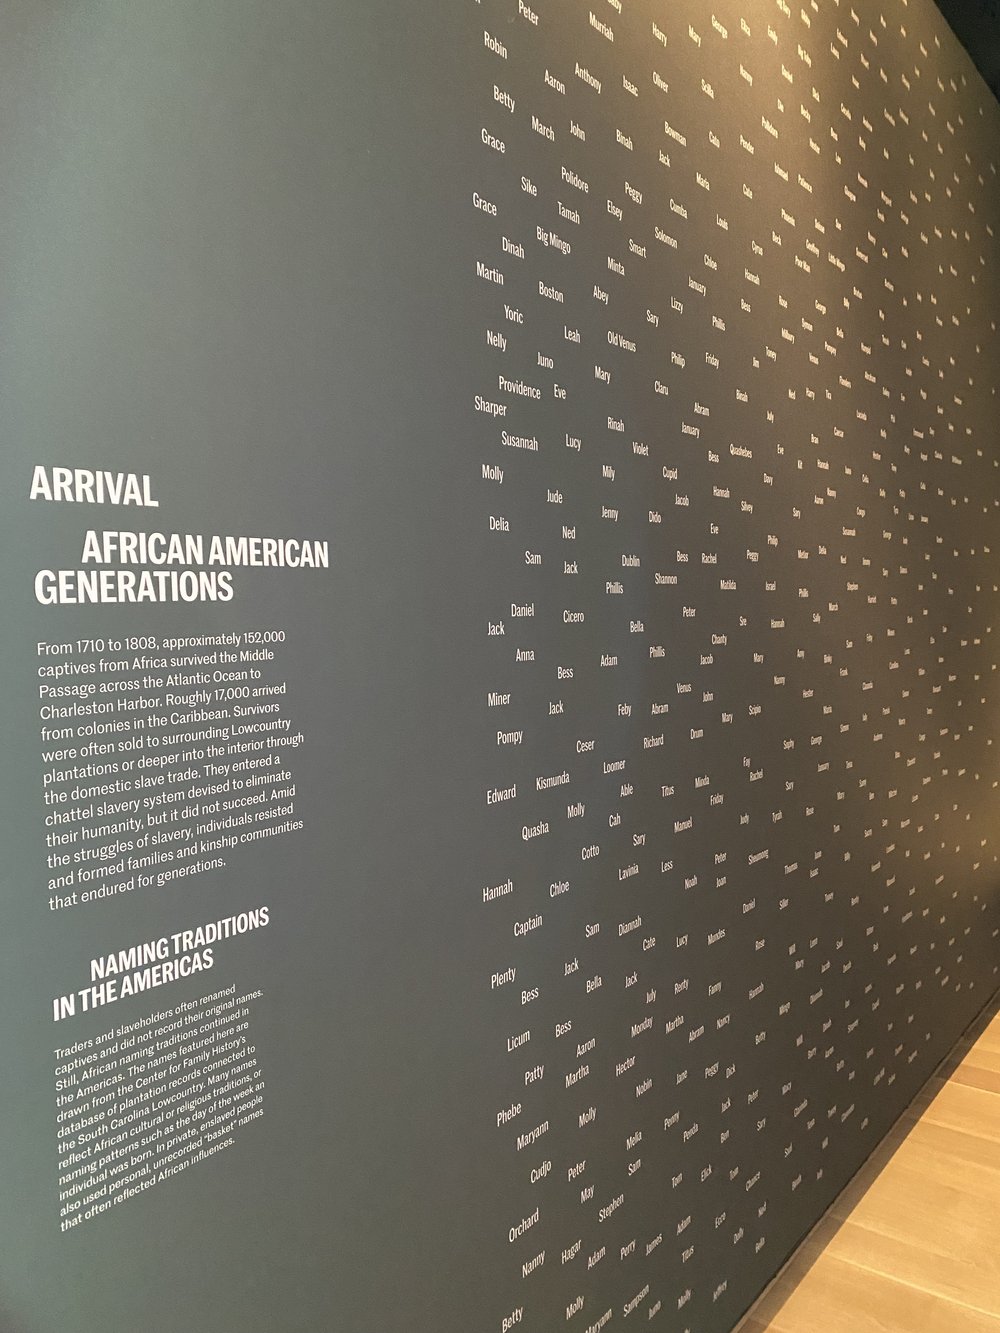 &lt;em&gt;Displayed are the names given to captive Africans by the traders and slaveholders.&lt;/em&gt;